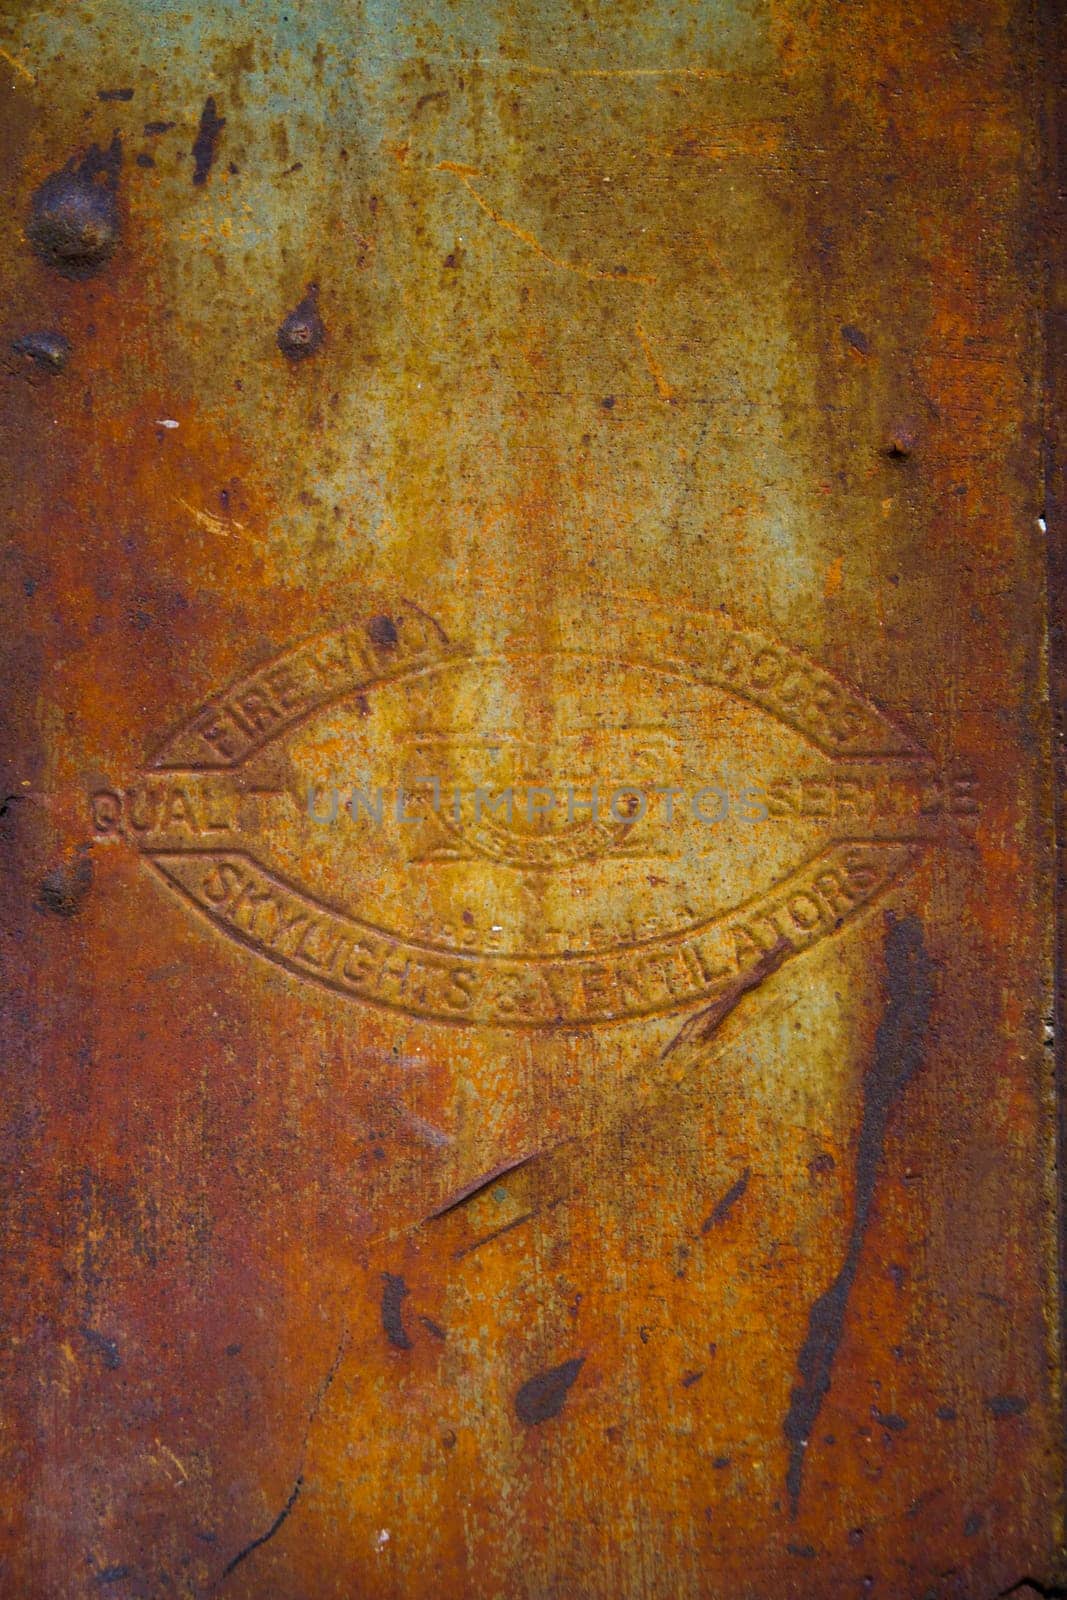 Embossed Emblem on Rusted Metal at Abandoned Illinois Plant Background by njproductions